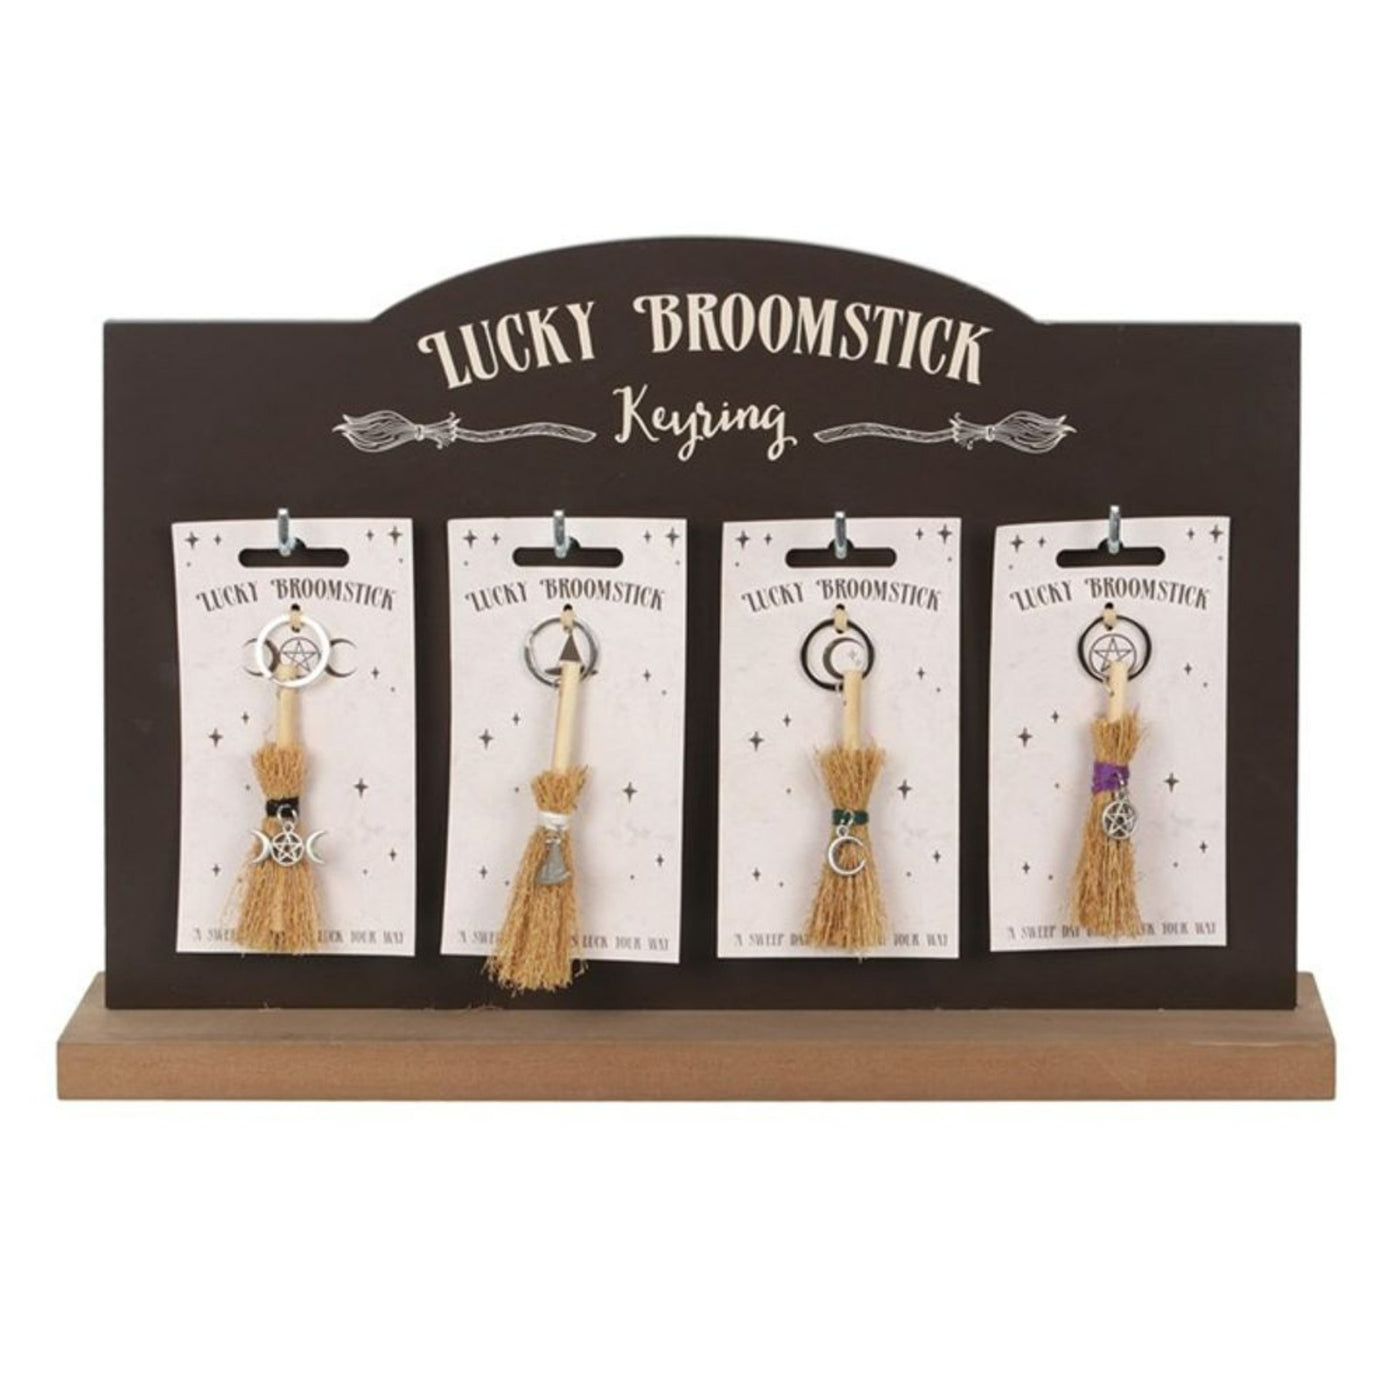 Set Of 24 Lucky Broomstick Keyrings On Display, Party Favours.